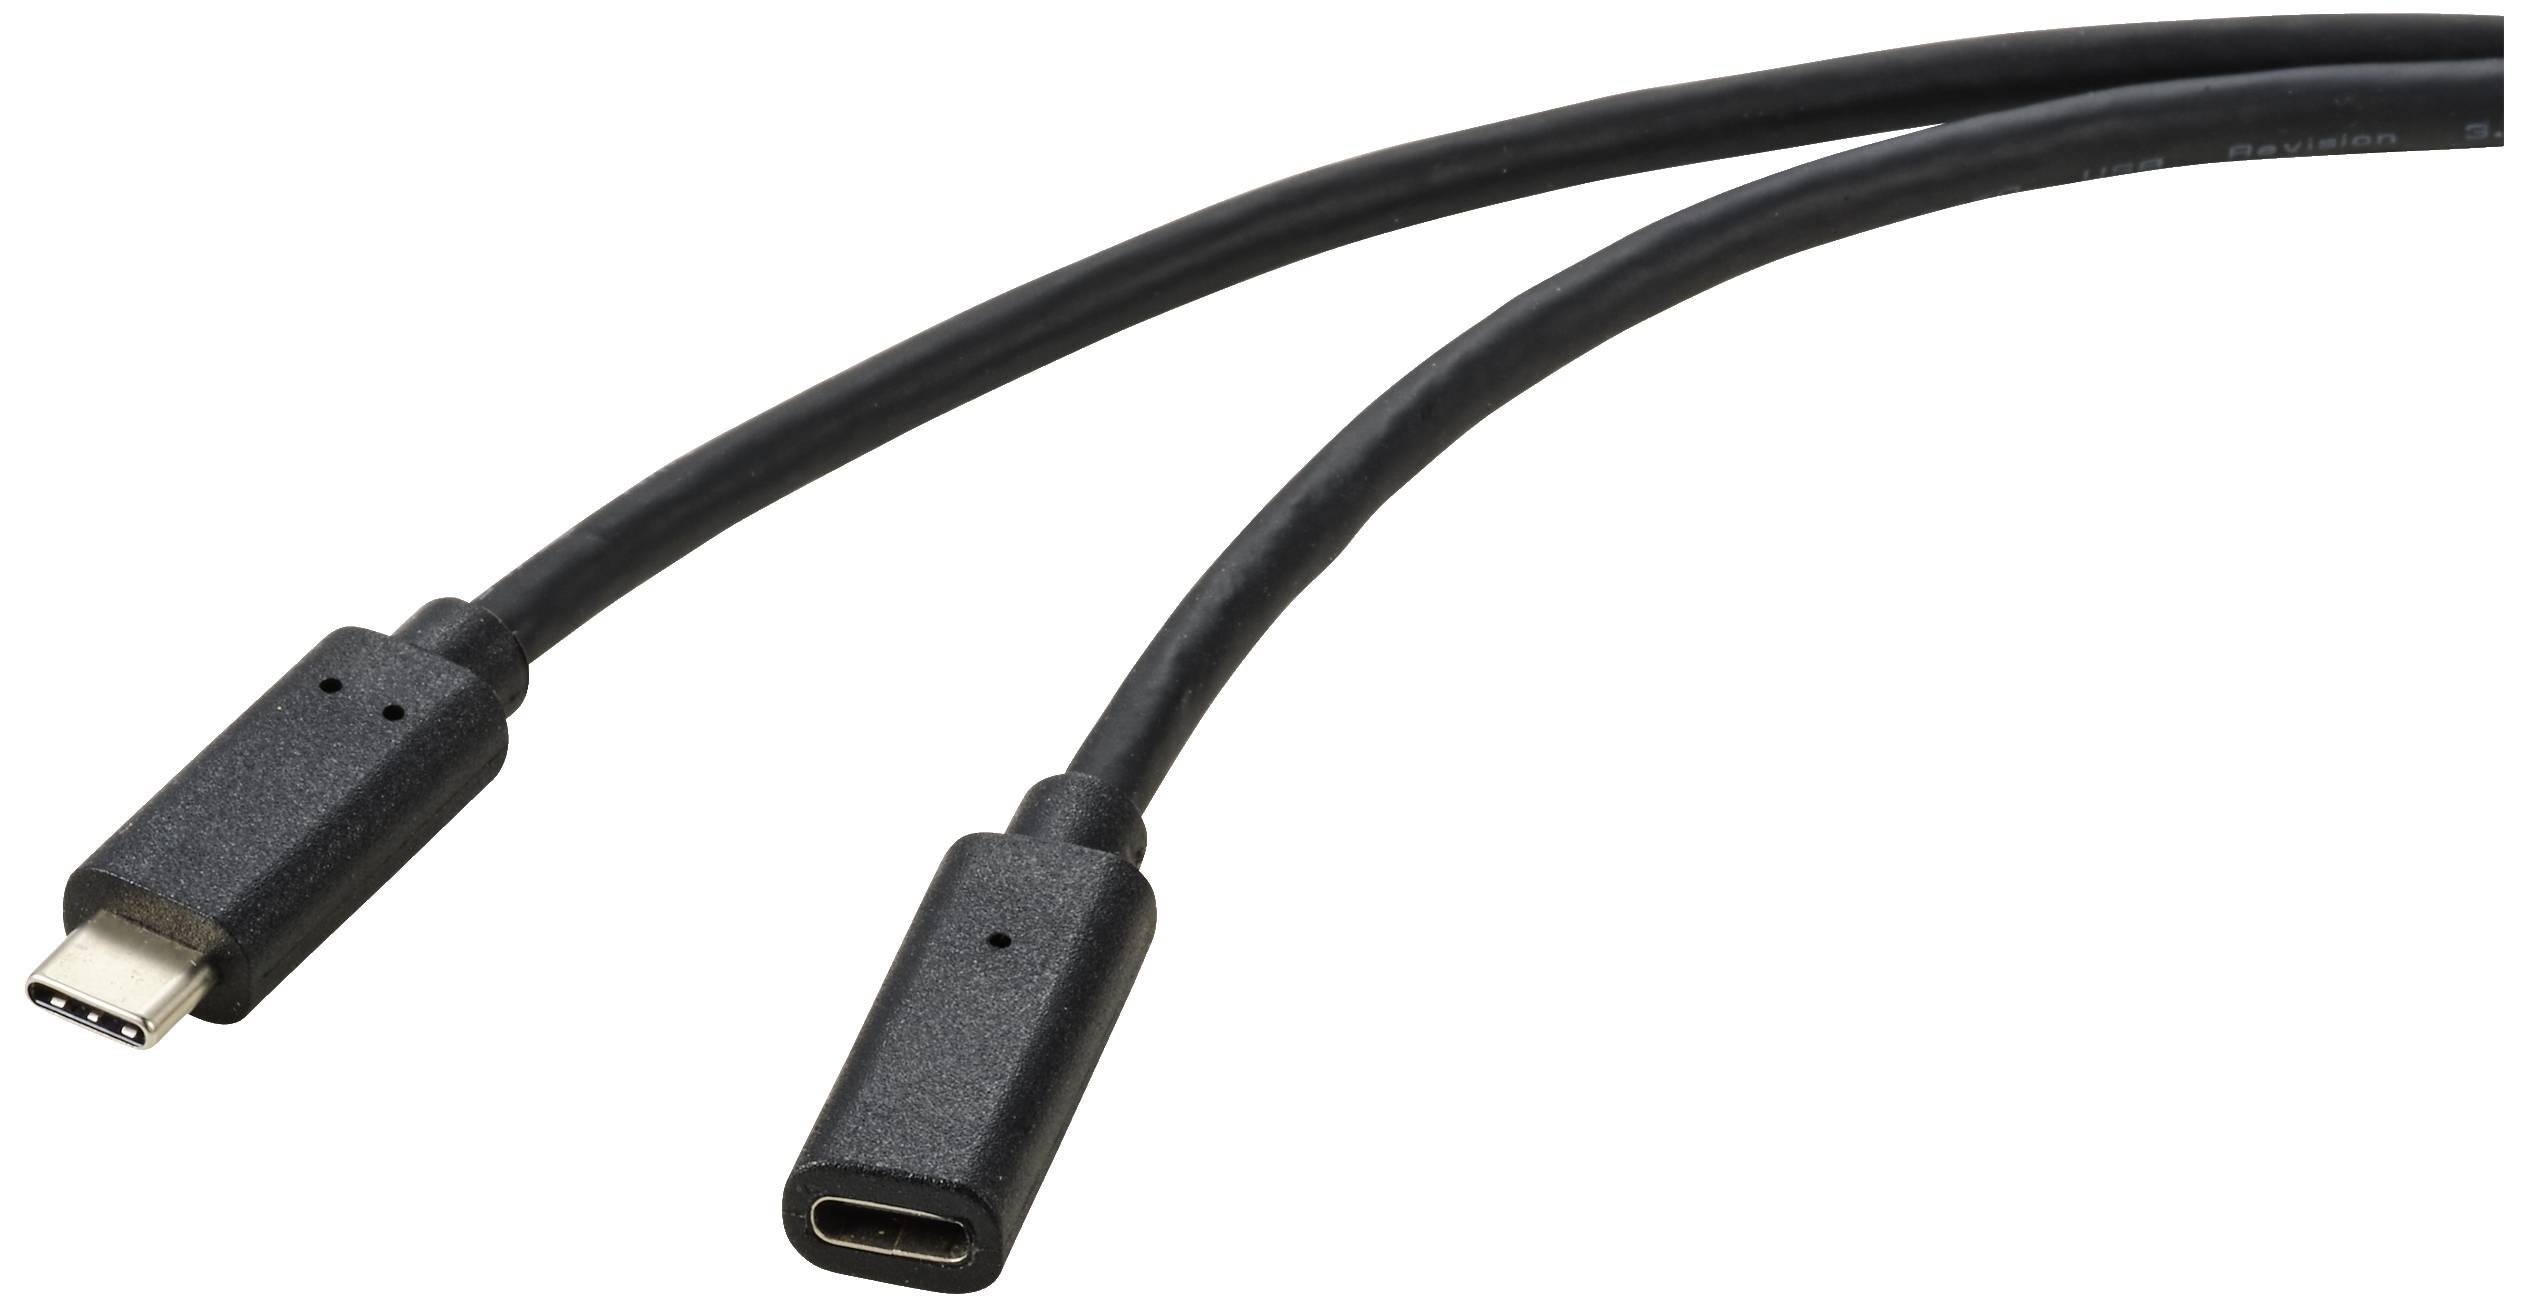 USB 3.2 (gen 2x2) cable with USB Type-C male to male